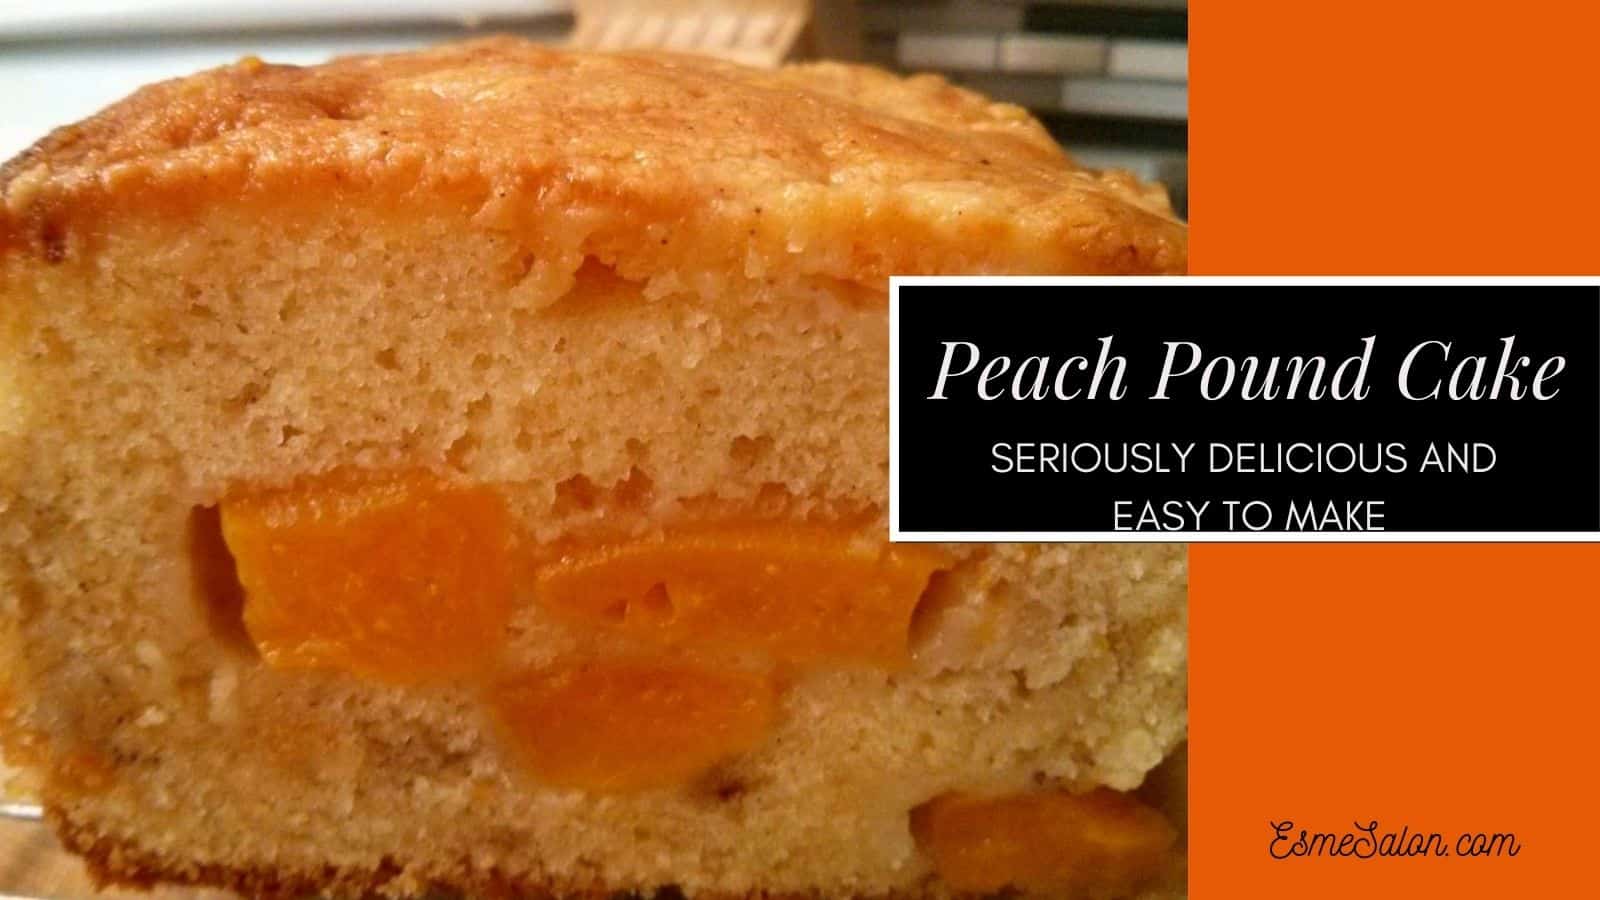 Peach Pound Cake is somewhere between a loaf, a cake, and a pudding made with tinned peaches